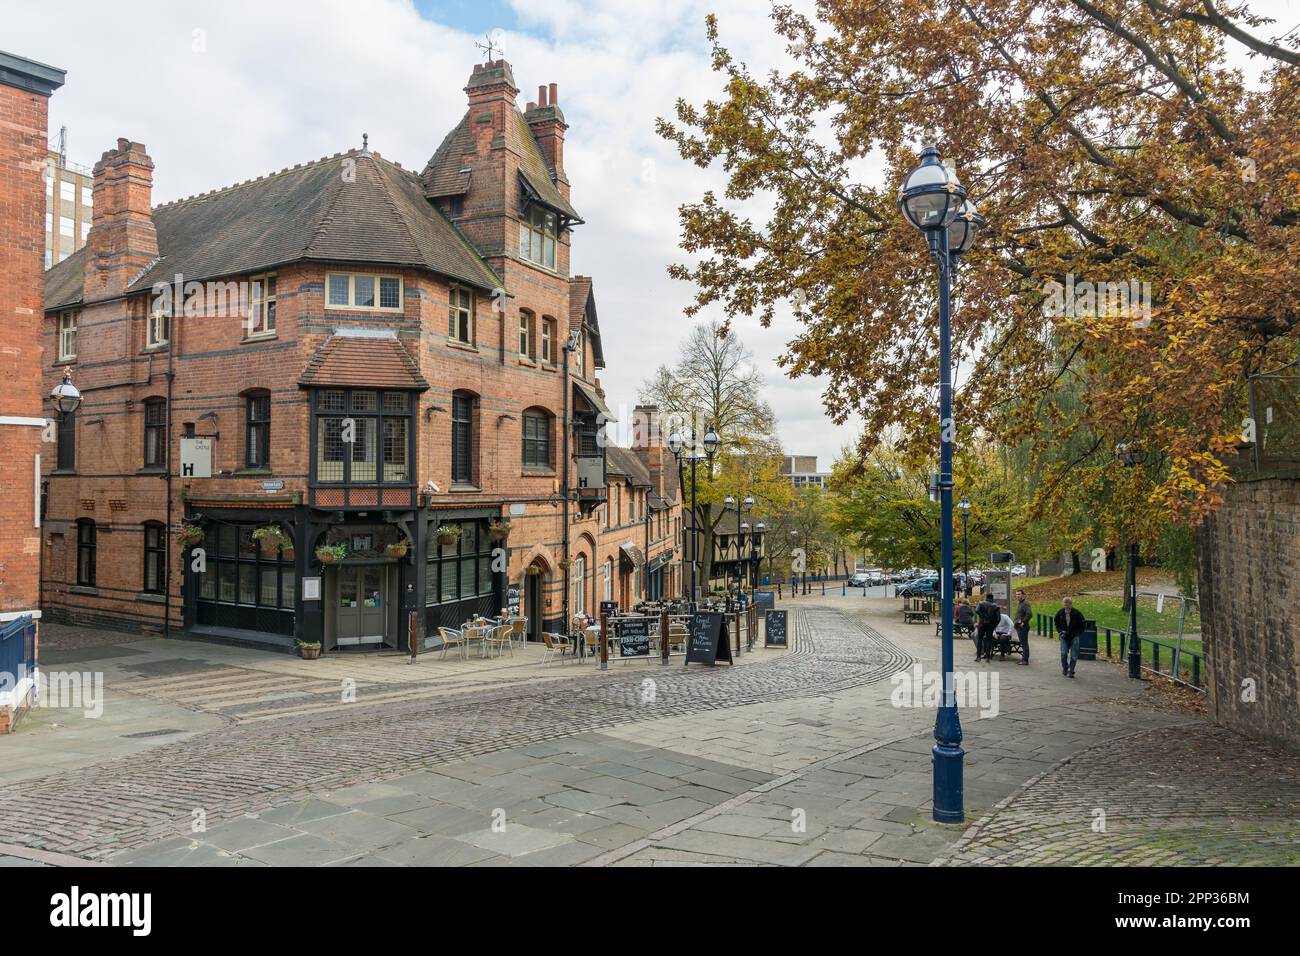 The Castle Pub Nottingham at Mortimer House, designed by local architect Watson Fothergill in 1883. Stock Photo